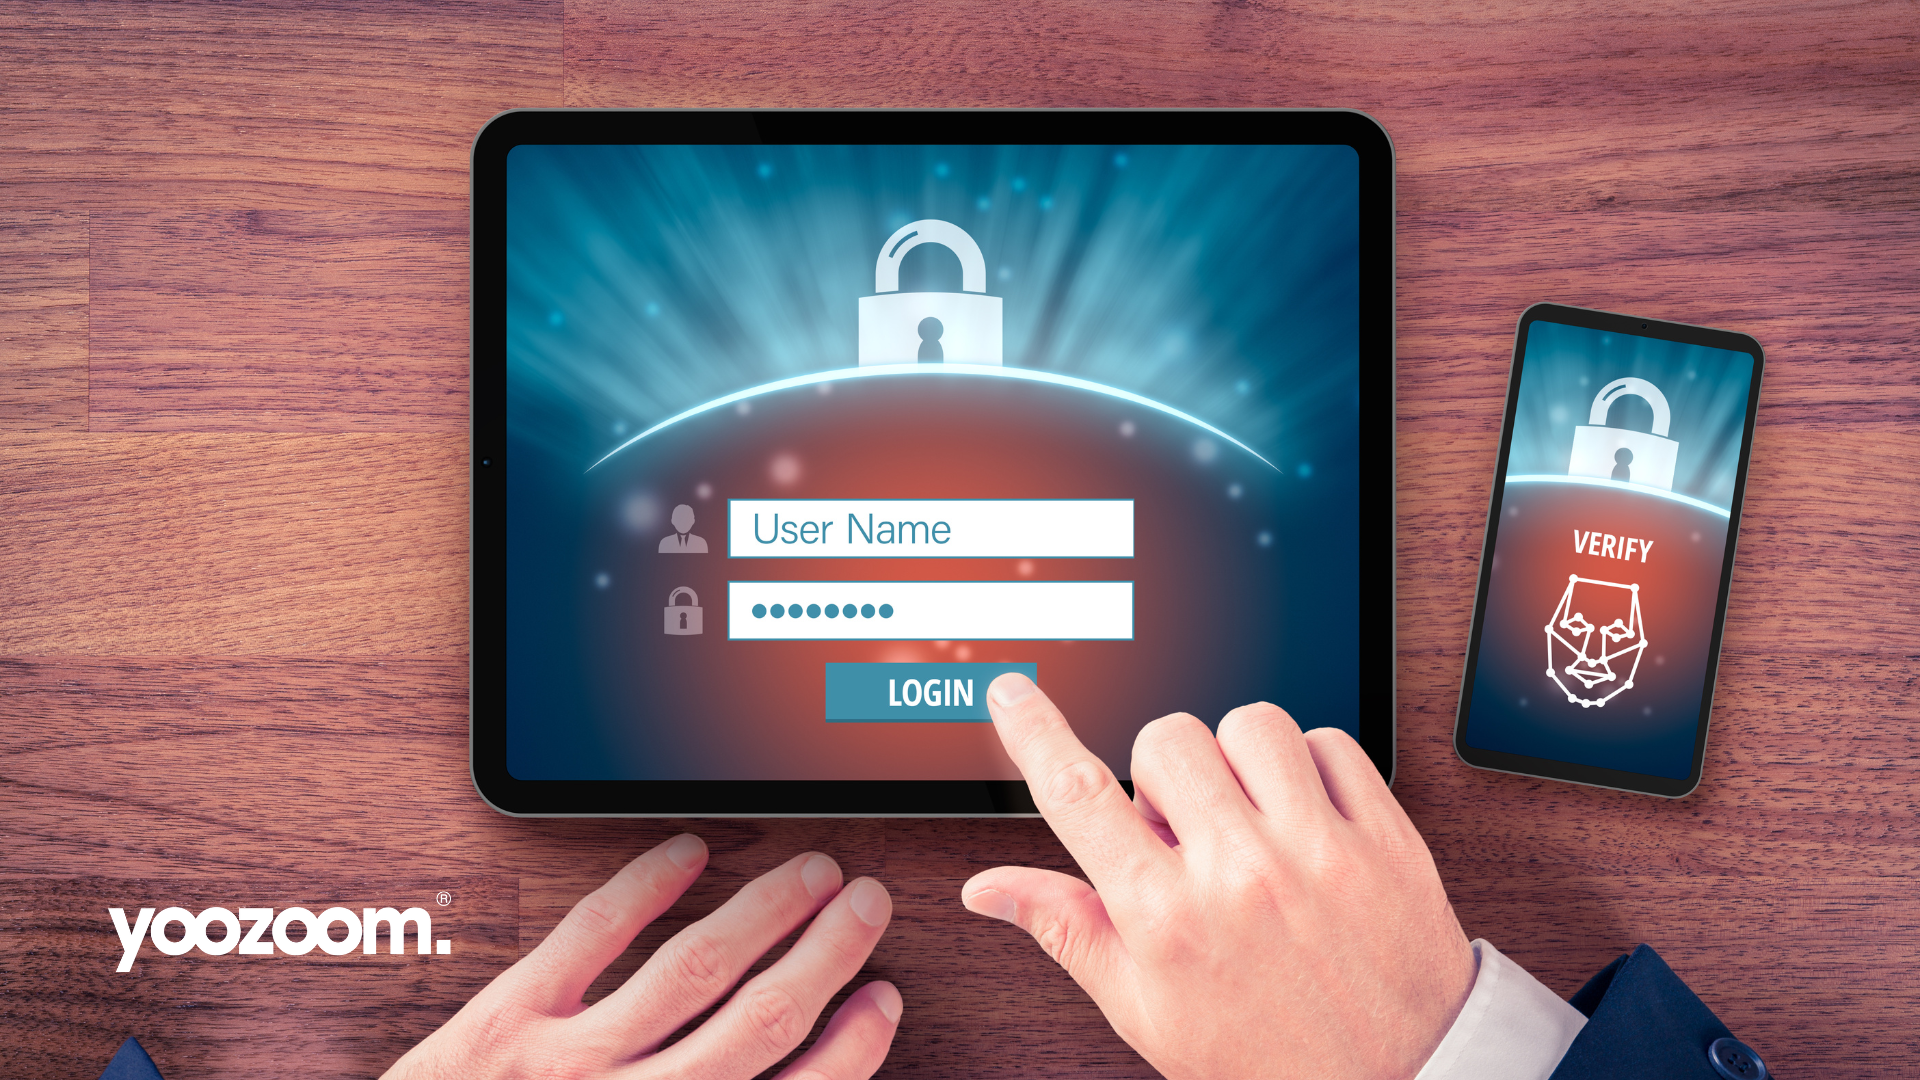 Multi-factor authentication can offer extra peace of mind for security-savvy businesses. Learn why it beats passwords, hands down.